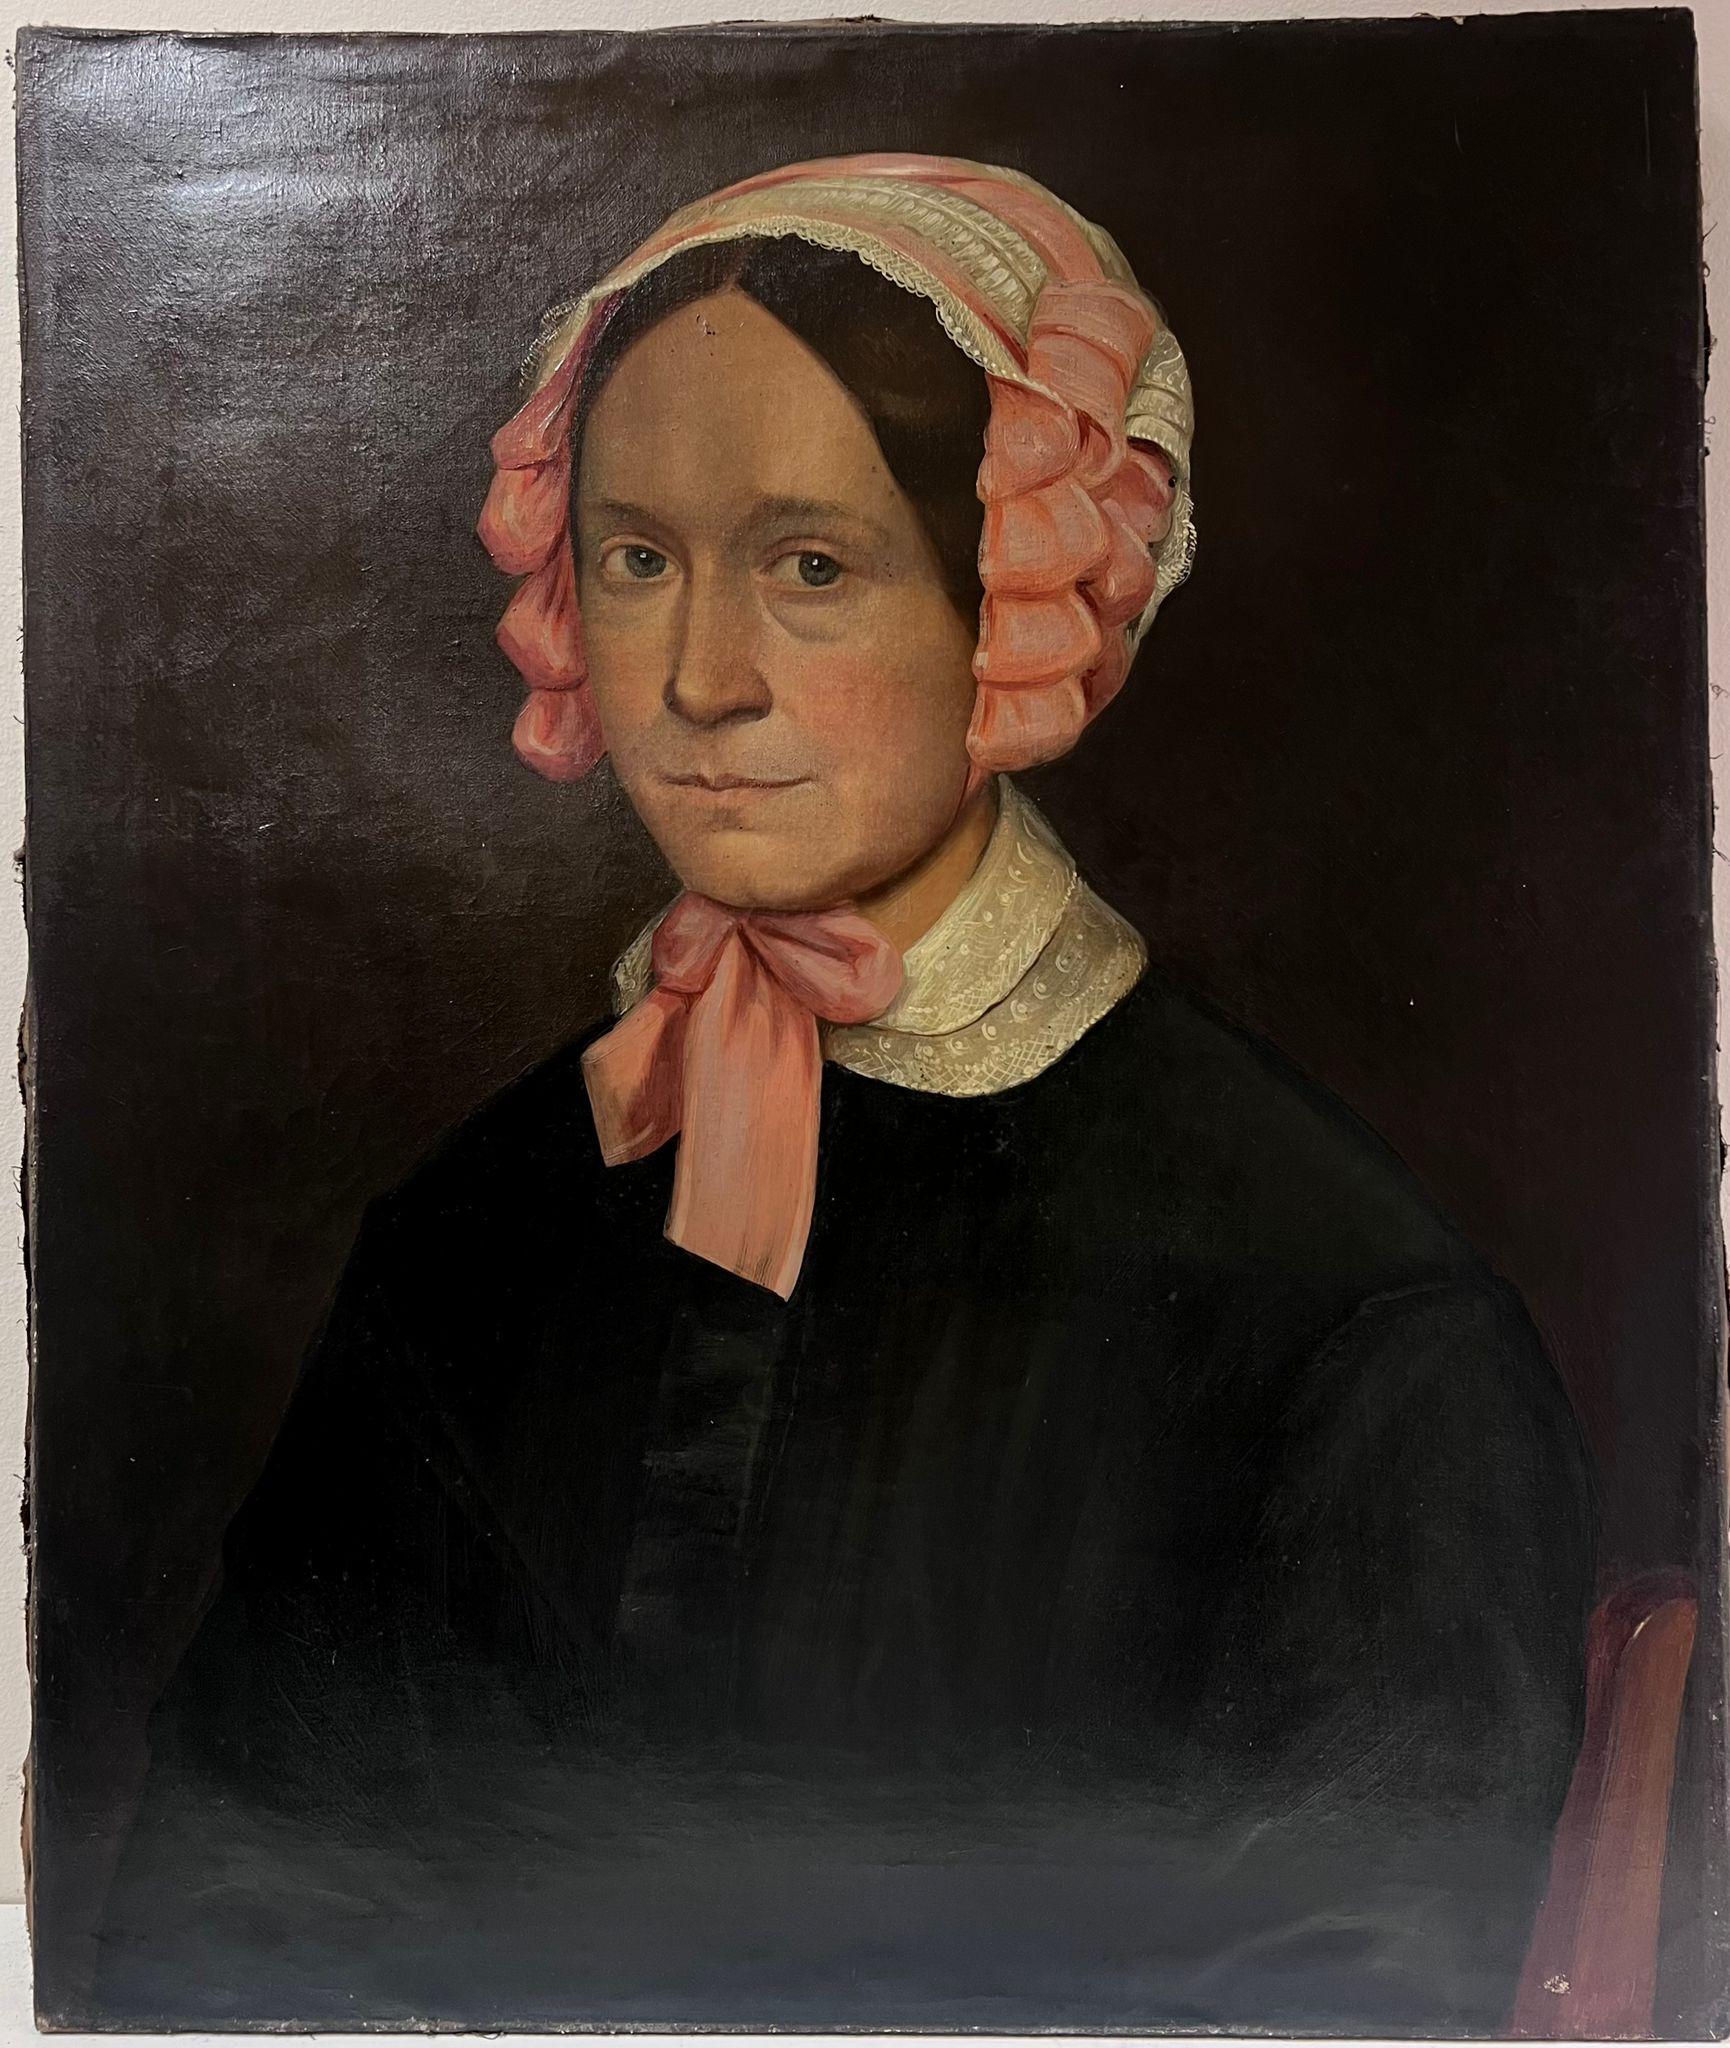 Portrait of a Country Lady
English School, mid 19th century
oil on canvas, unframed
canvas : 21.5 x 25.5 inches
provenance: private collection
condition: basic good condition but very much showing the signs of age. 